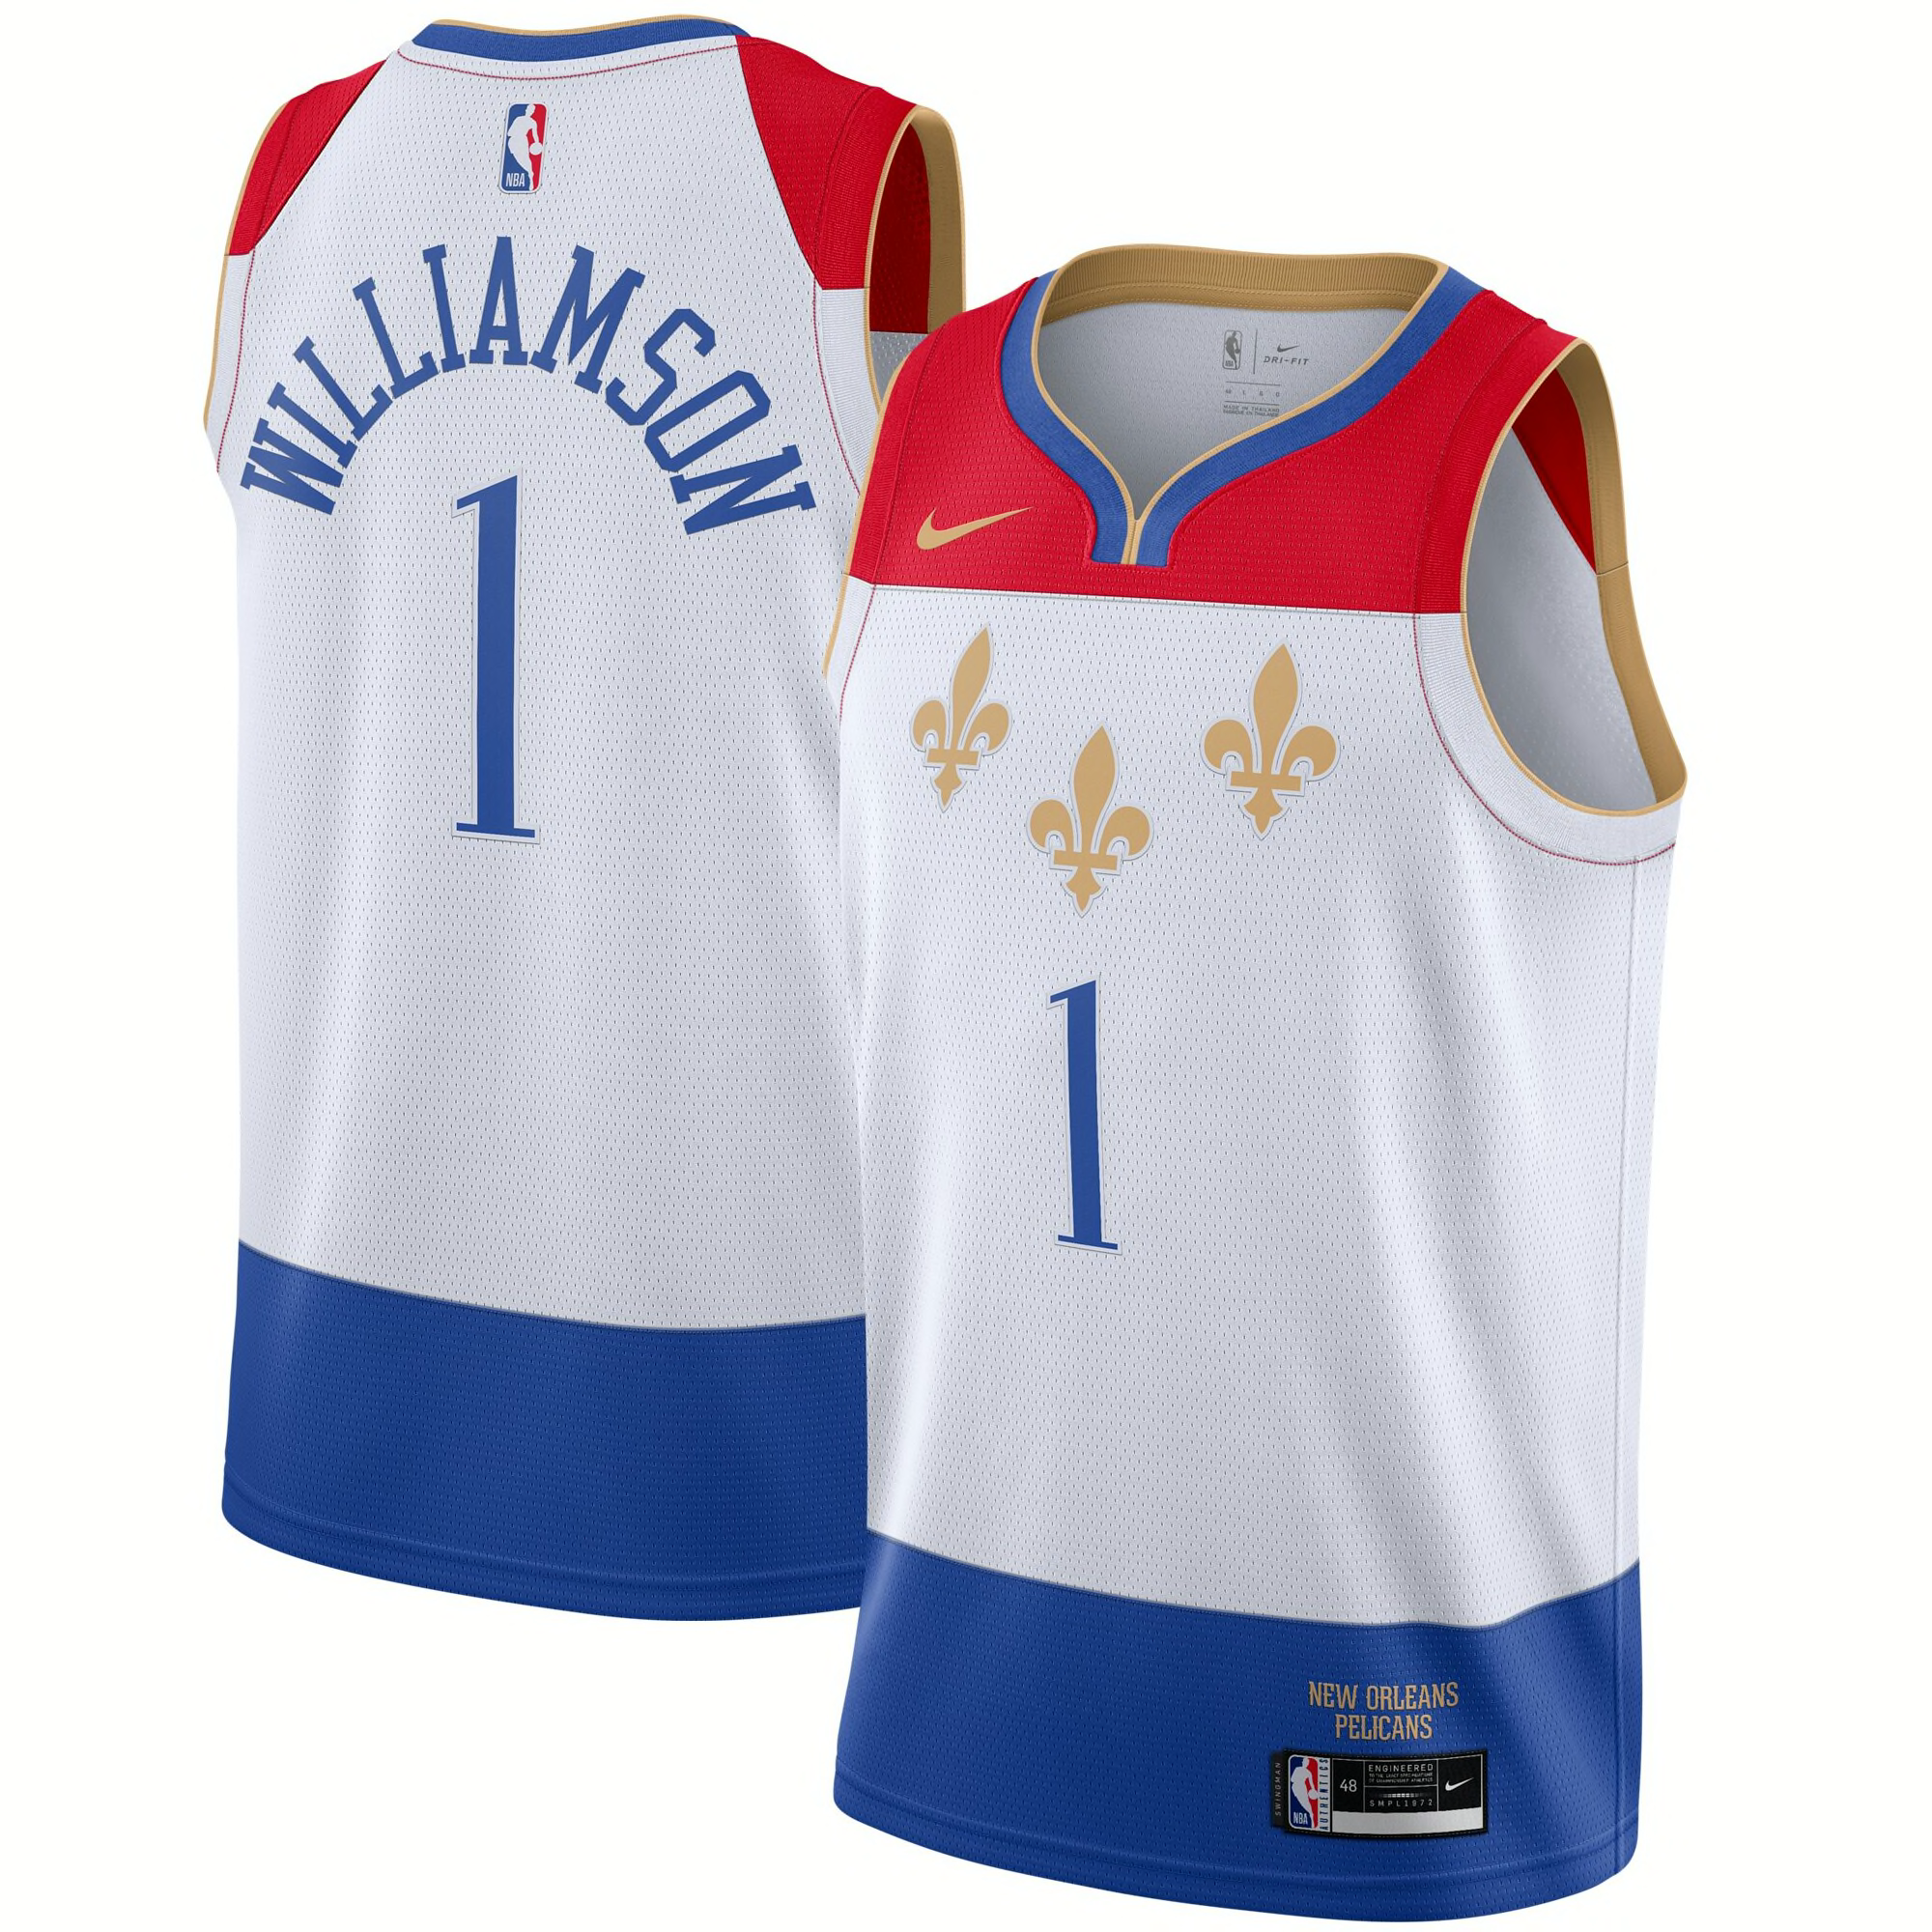 Ranking NBA City Edition jerseys from the awful to the elite